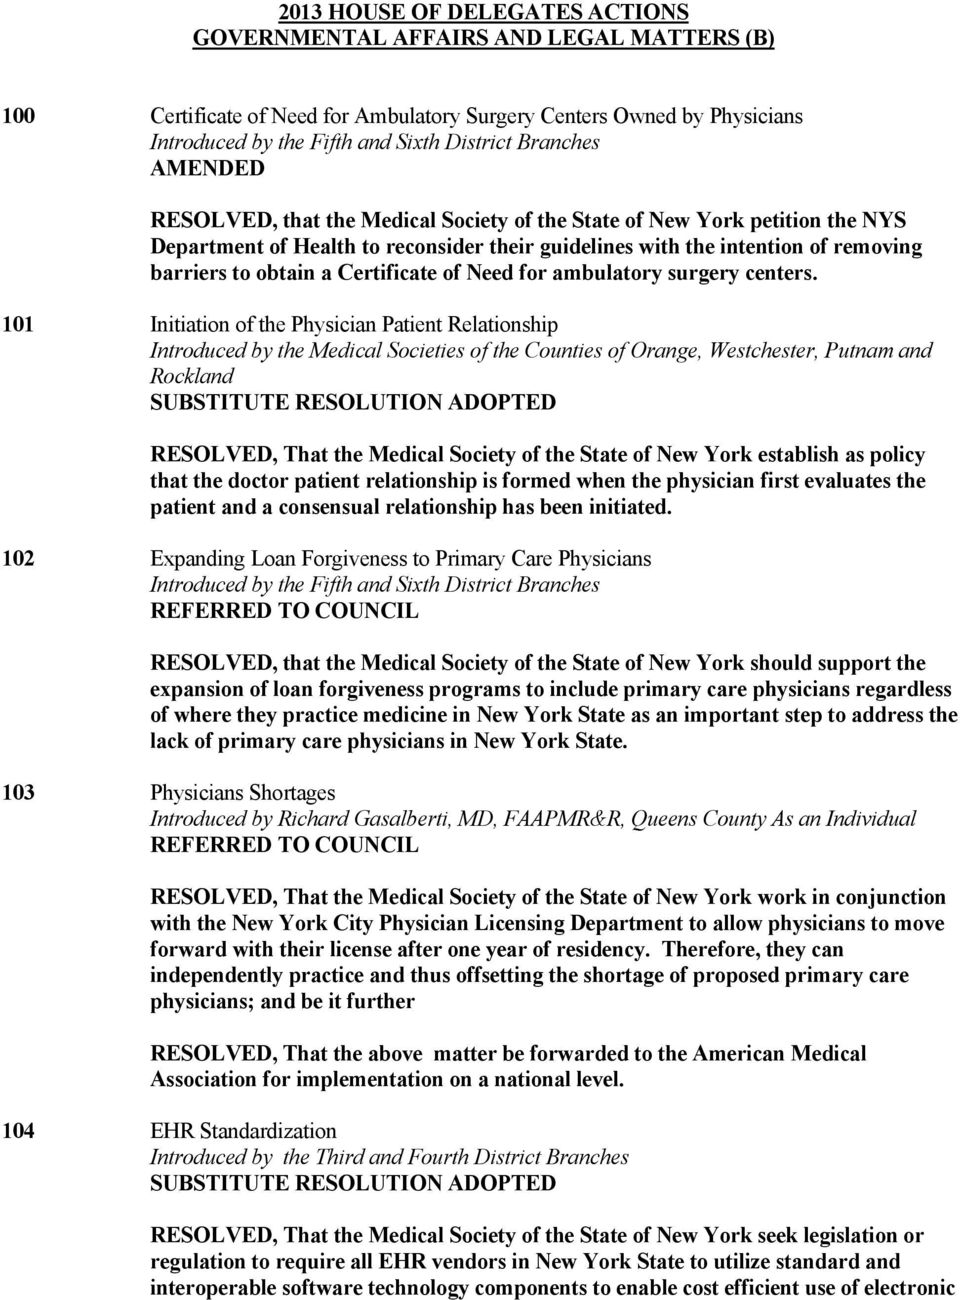 101 Initiation of the Physician Patient Relationship Introduced by the Medical Societies of the Counties of Orange, Westchester, Putnam and Rockland RESOLVED, That the Medical Society of the State of